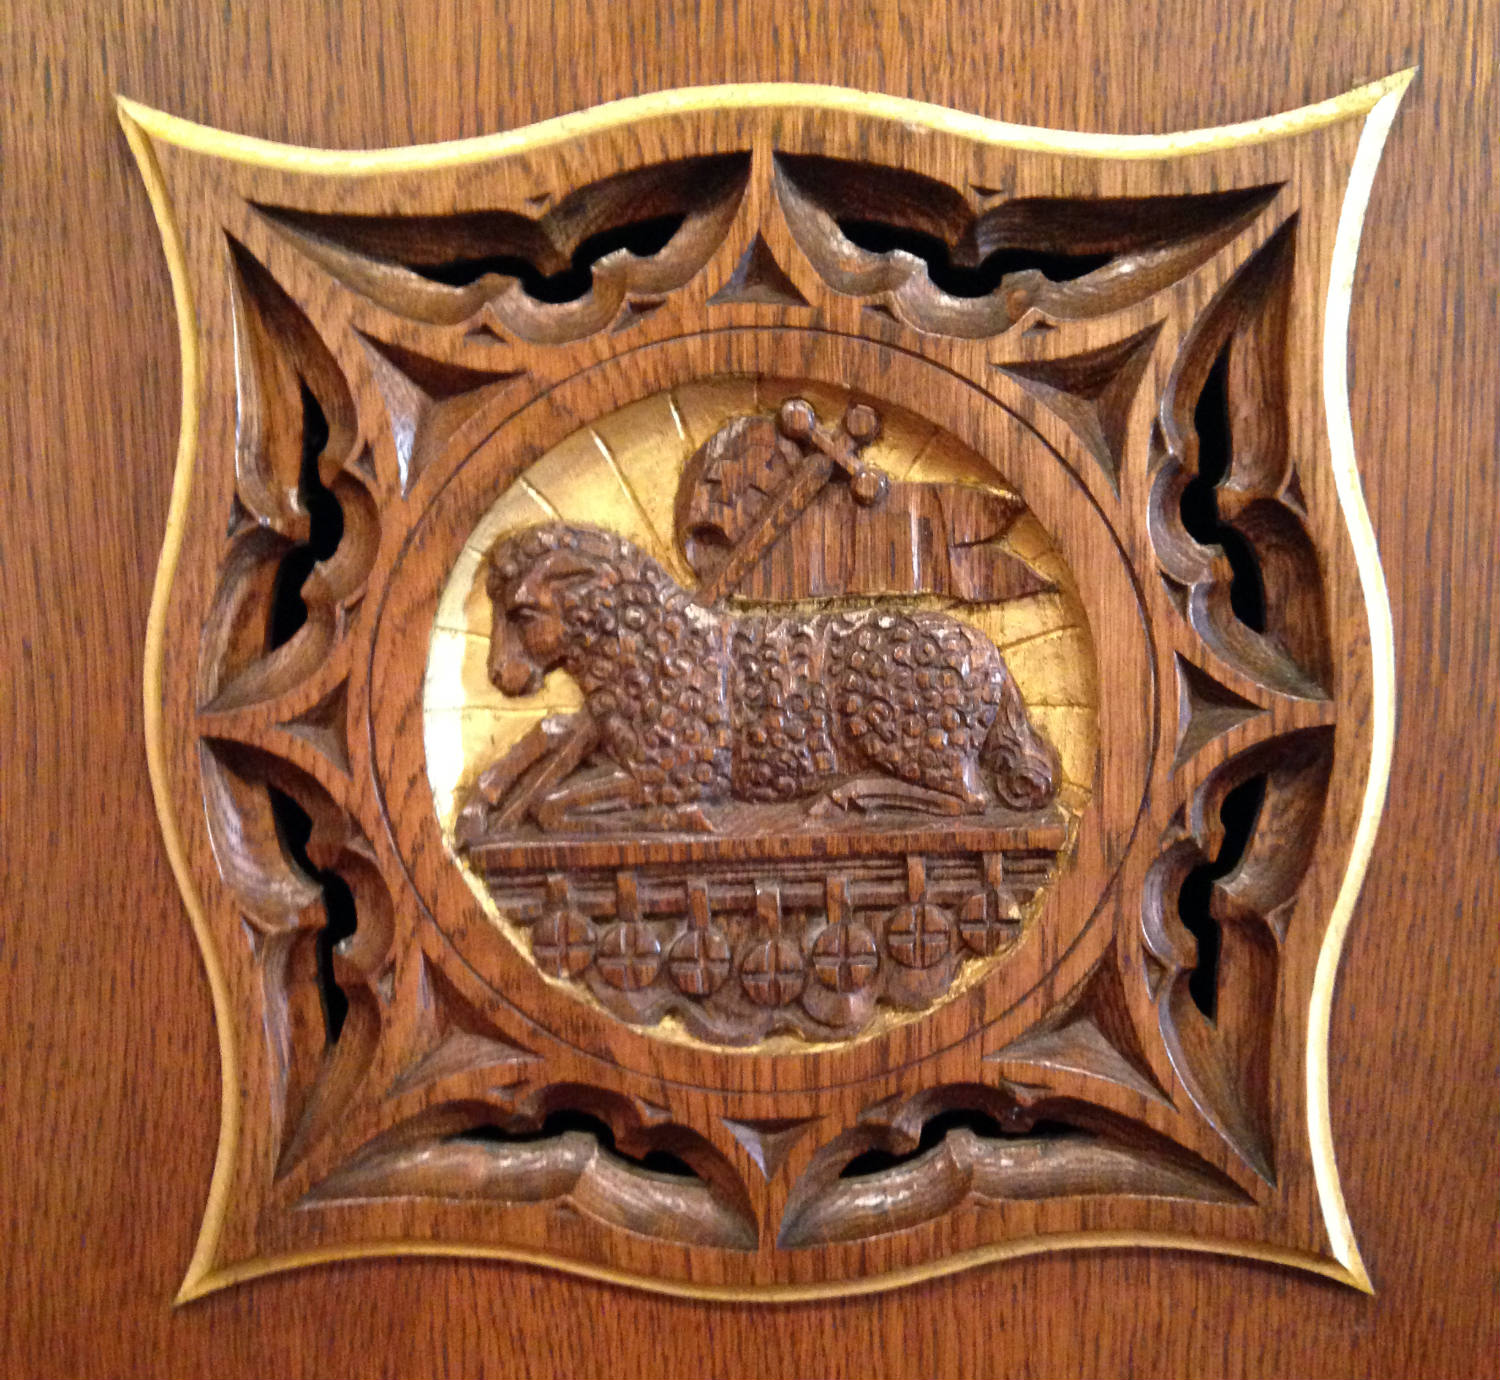 Religious Symbols in Woodwork at former St. Michael's Mission in Conesus, New York